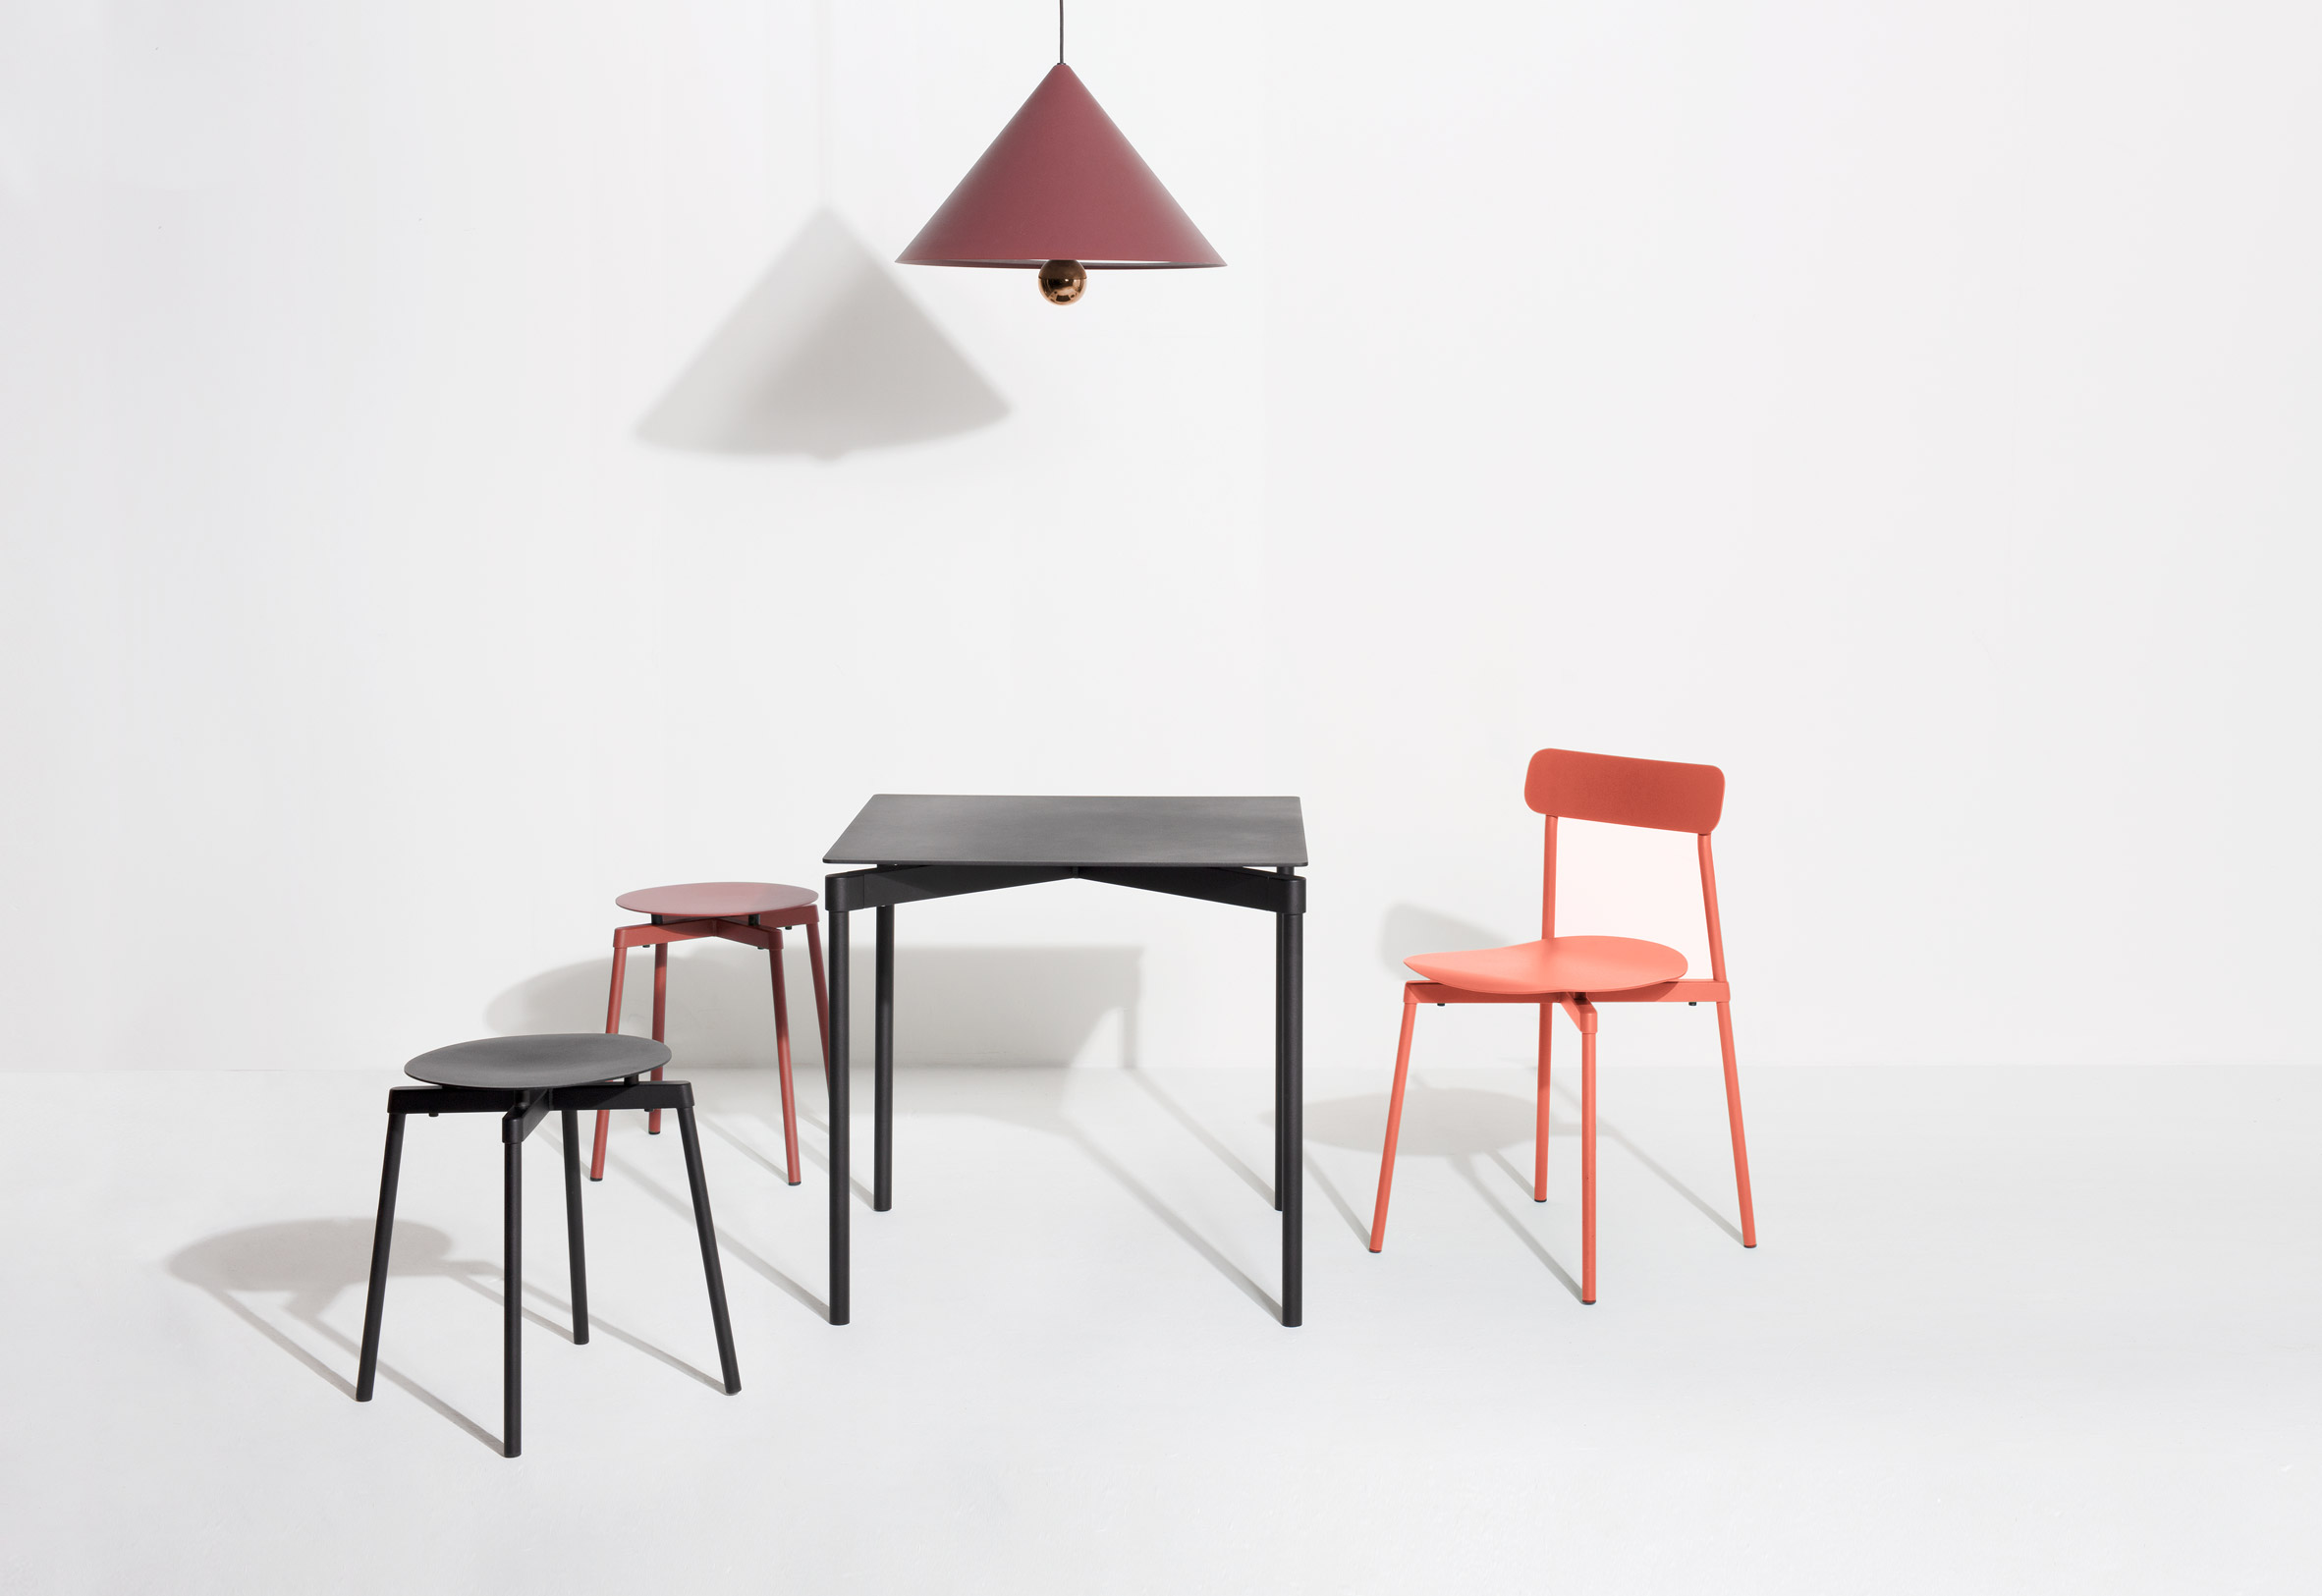 Orange Fromme chair by Petite Friture with the collection of stools and dining table